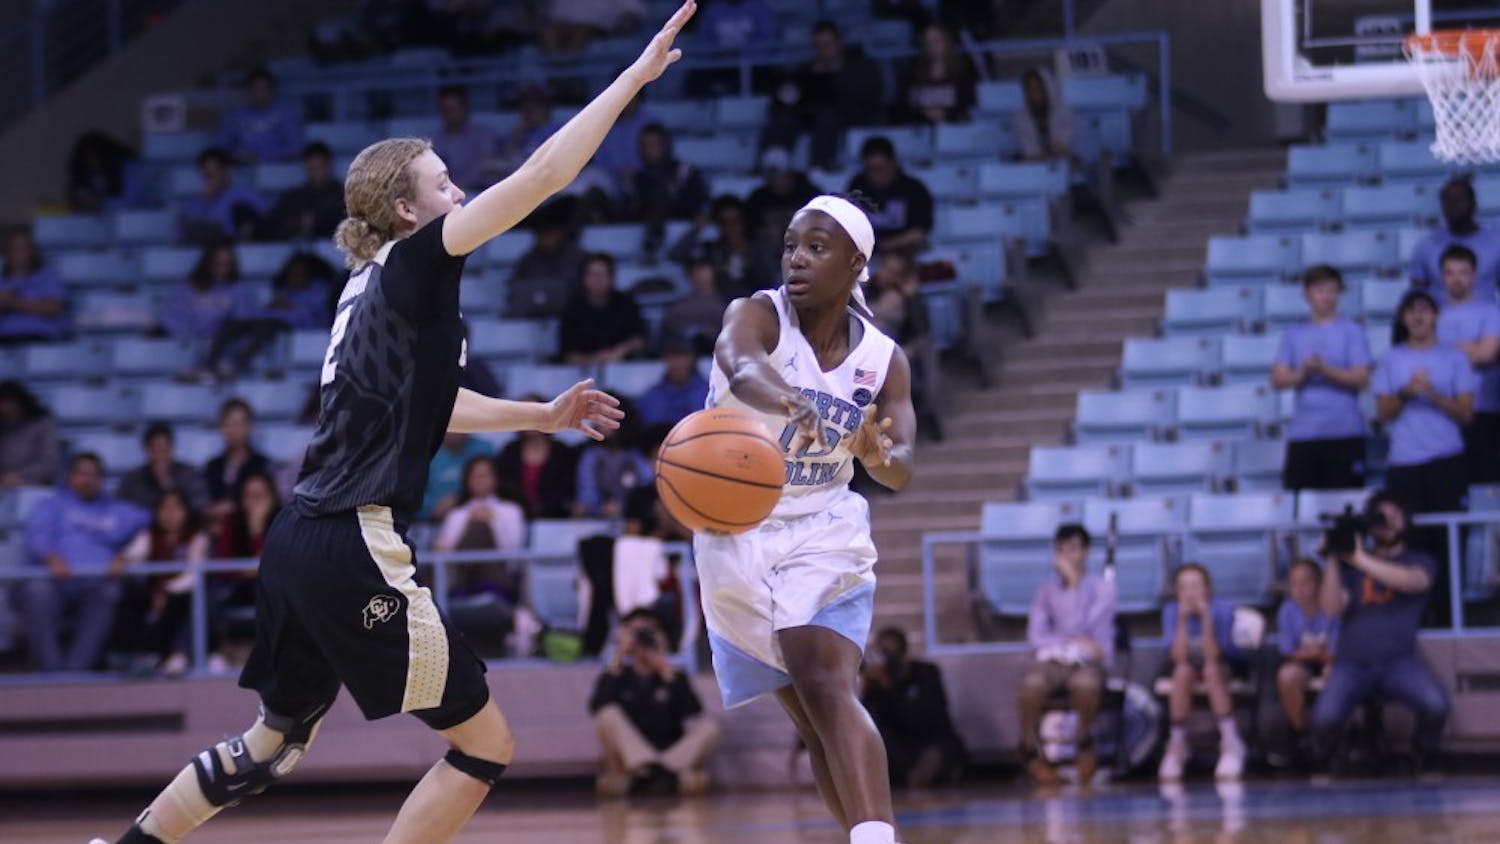 Guard Jamie Cherry (10) passes the ball during a game against Colorado on Sunday afternoon in Carmichael Arena.